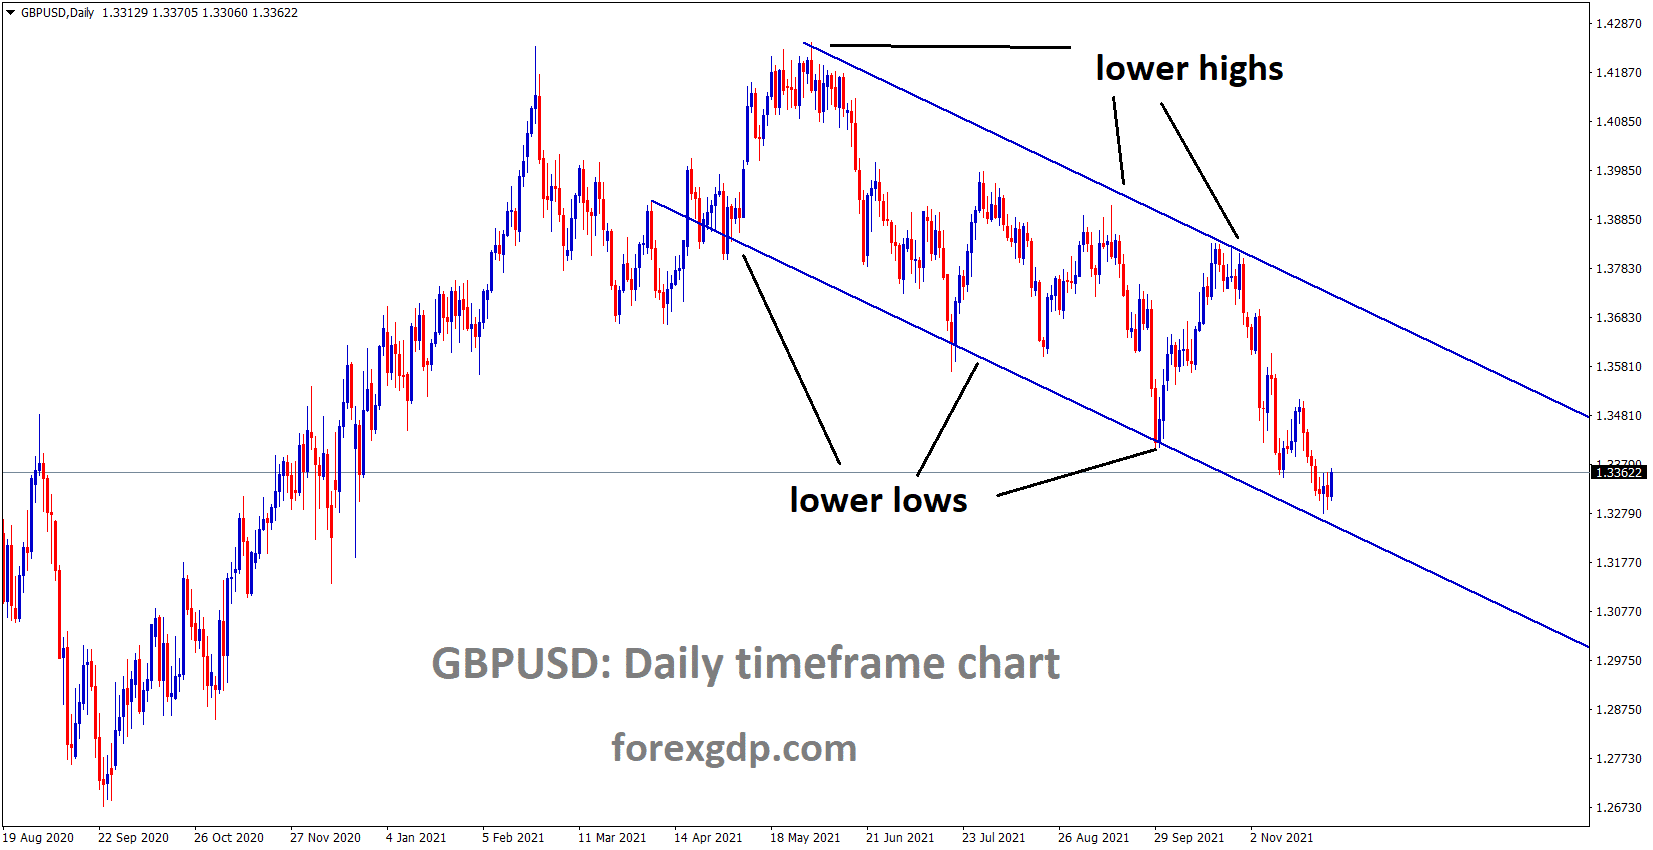 GBPUSD is moving in the Descending channel and the market rebounding from the lower low area of the channel.